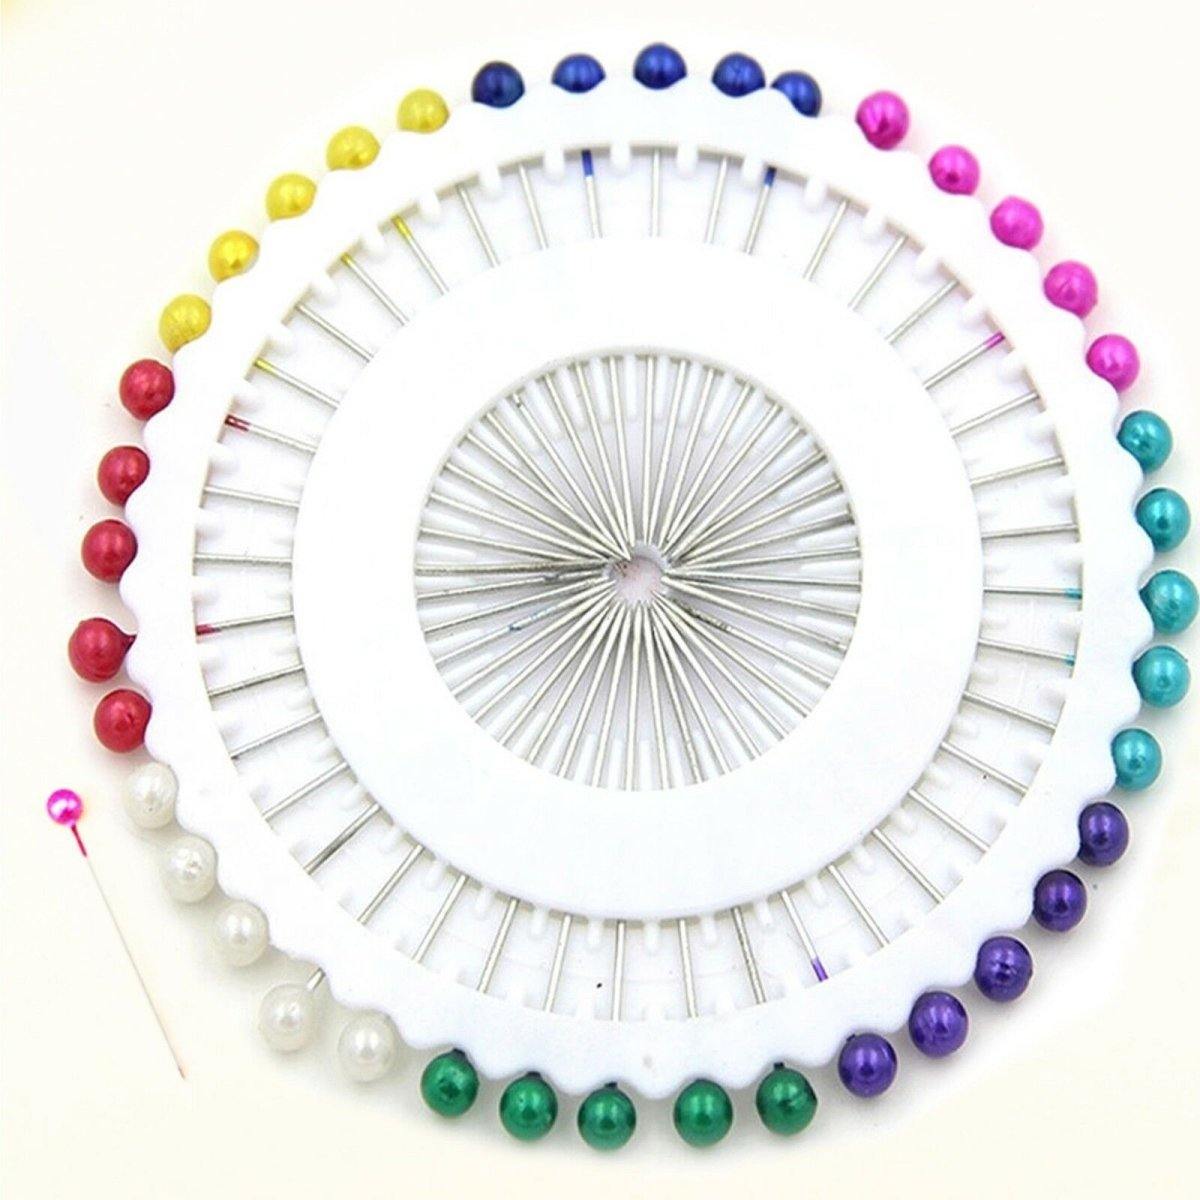 Hijab Pins Wheel - 40 Multi Coloured Pins - Divinity Collection